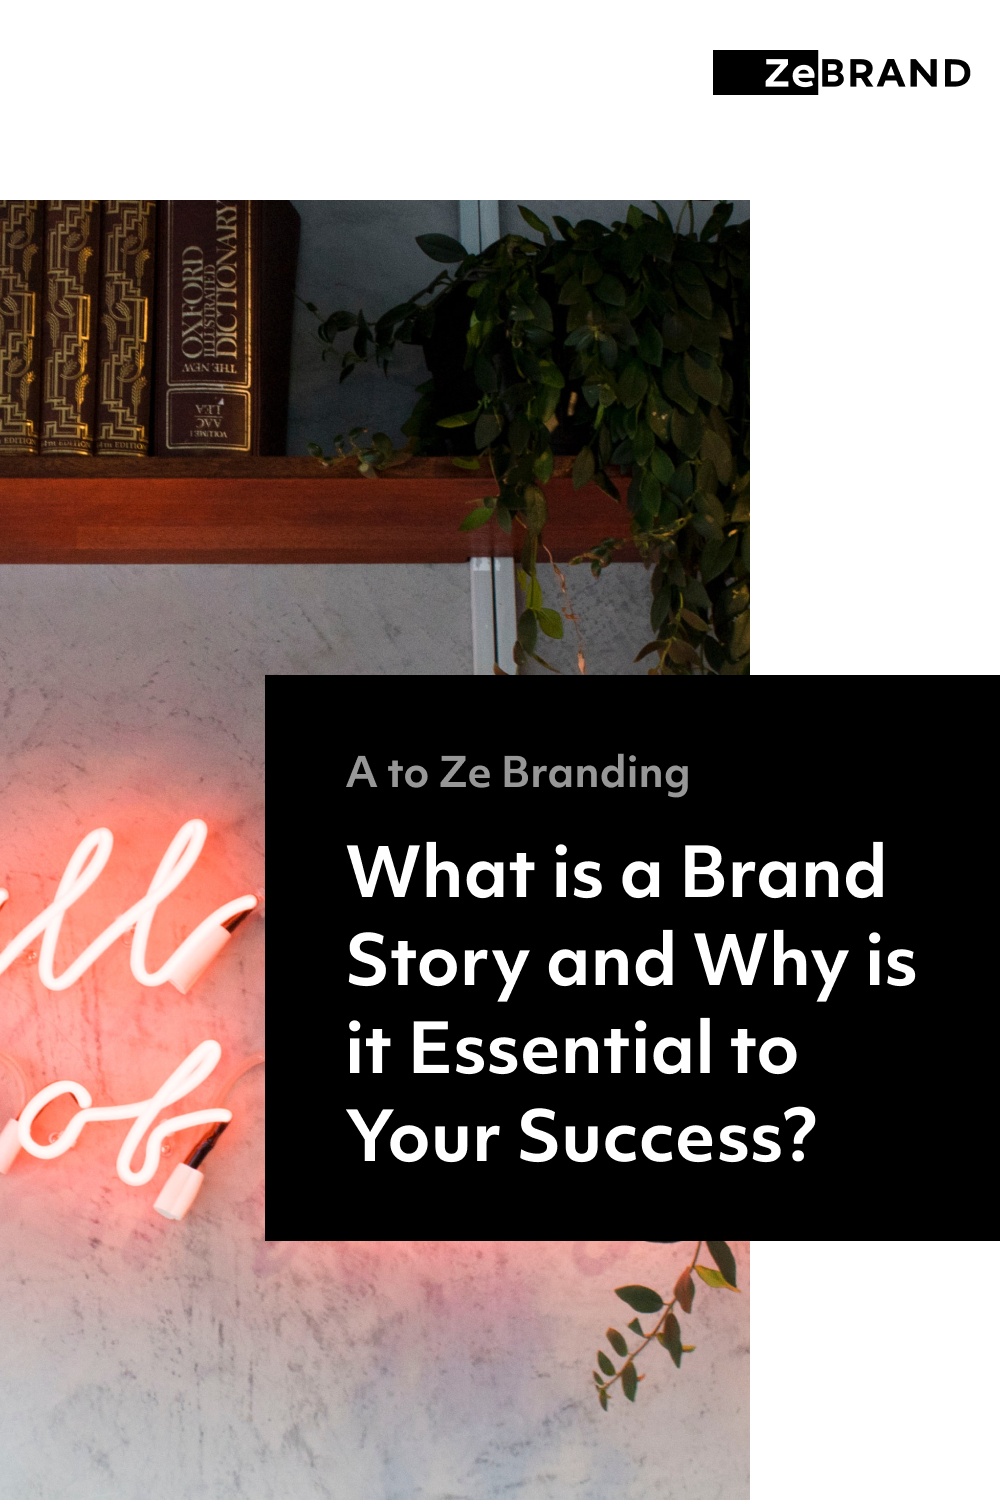 What is a Brand Story and Why is it Essential to Your Success?